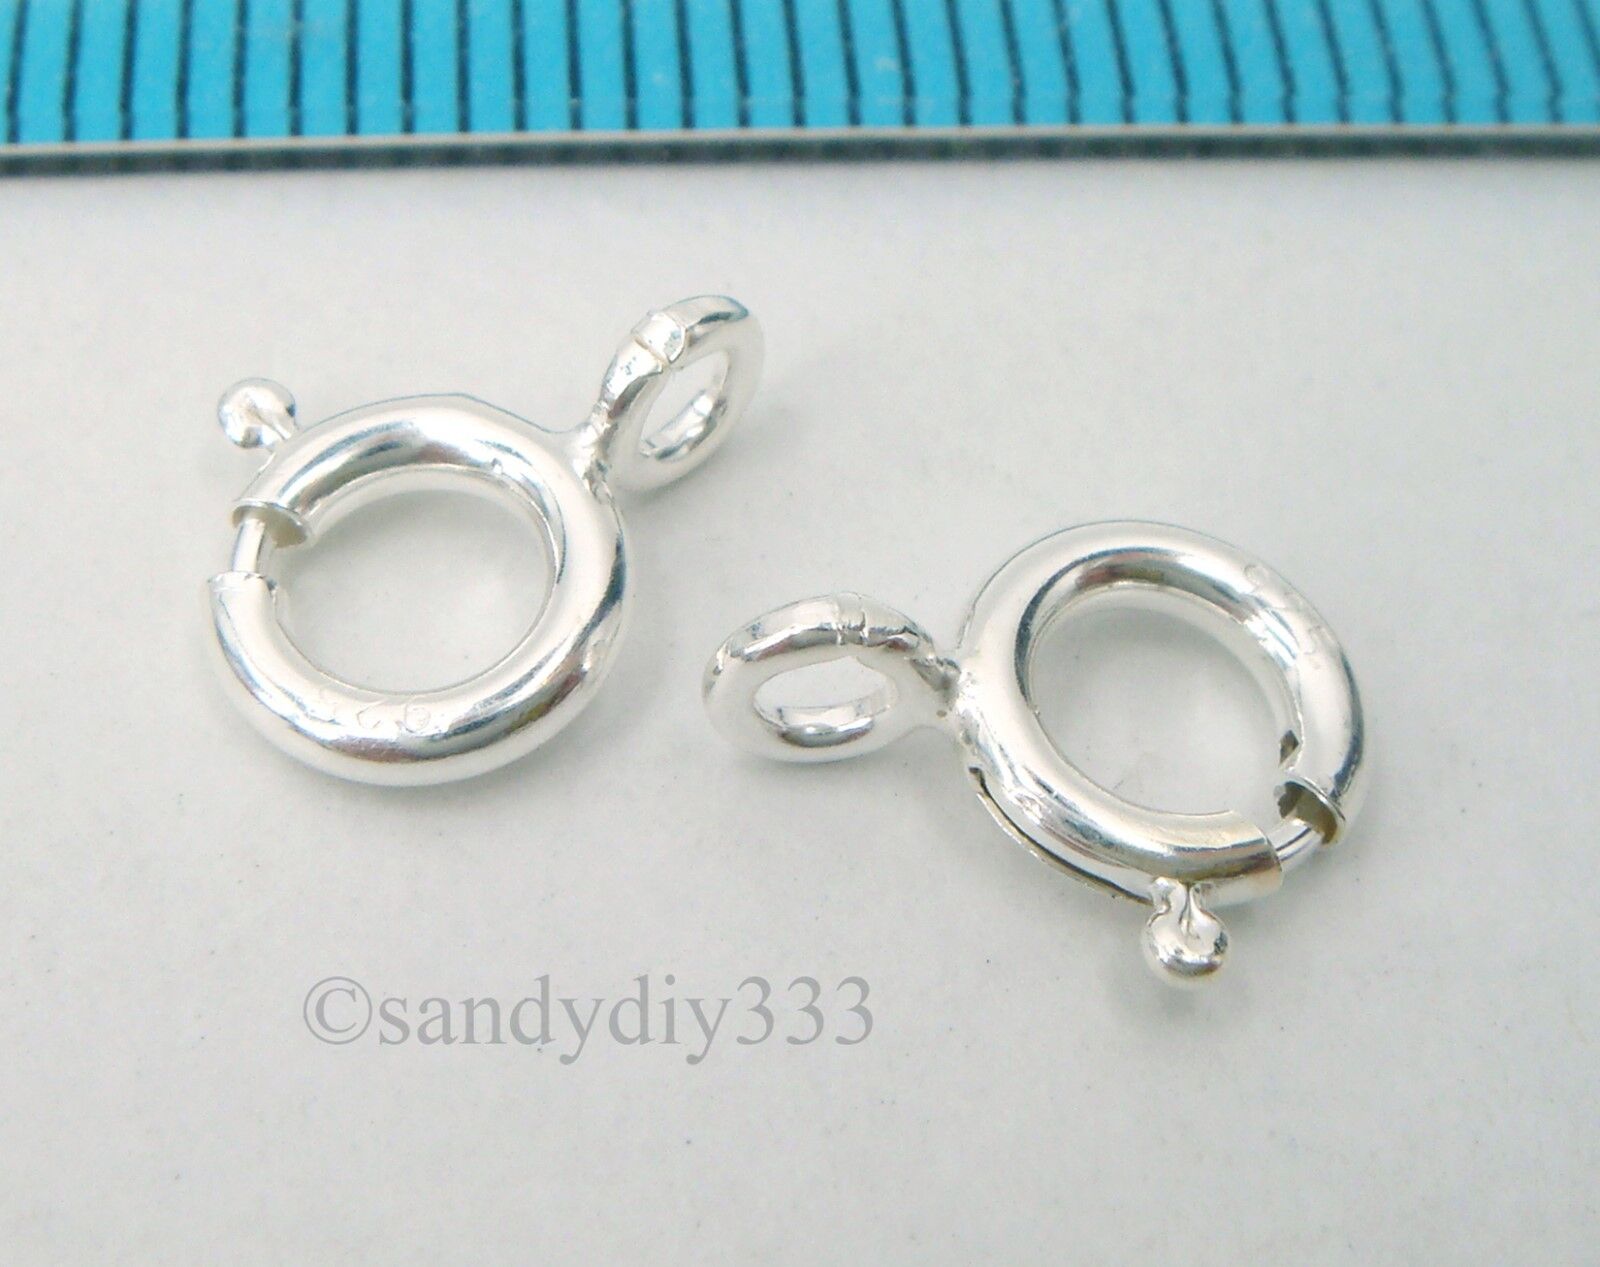 10x ITALIAN STERLING SILVER SPRING ROUND RING CLASP 7mm #2563